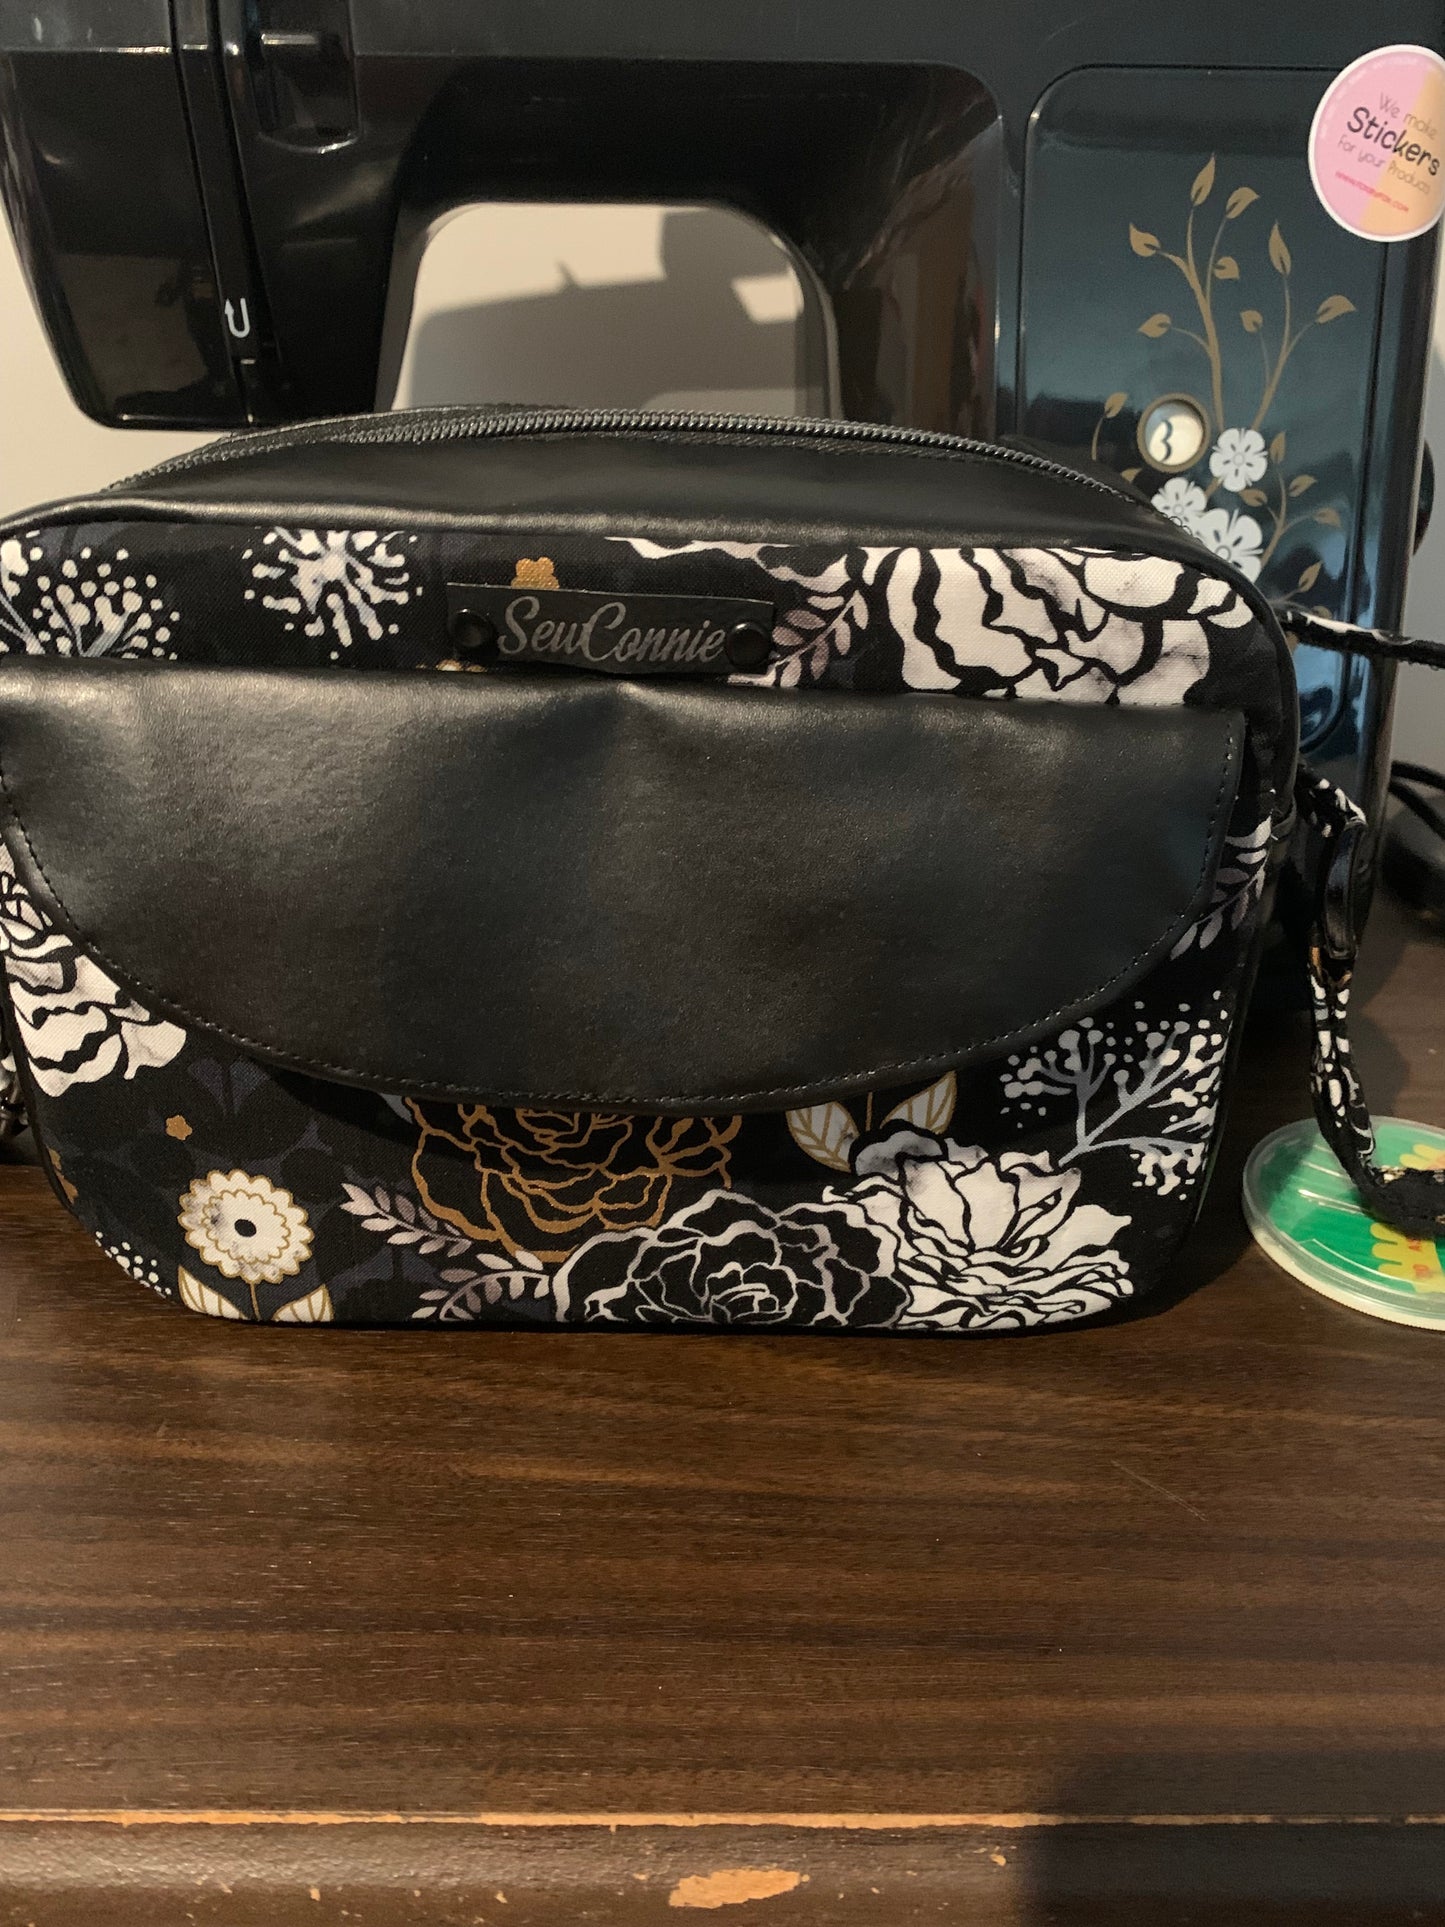 Black and white roses with black vinyl rectangle shaped crossbody bag